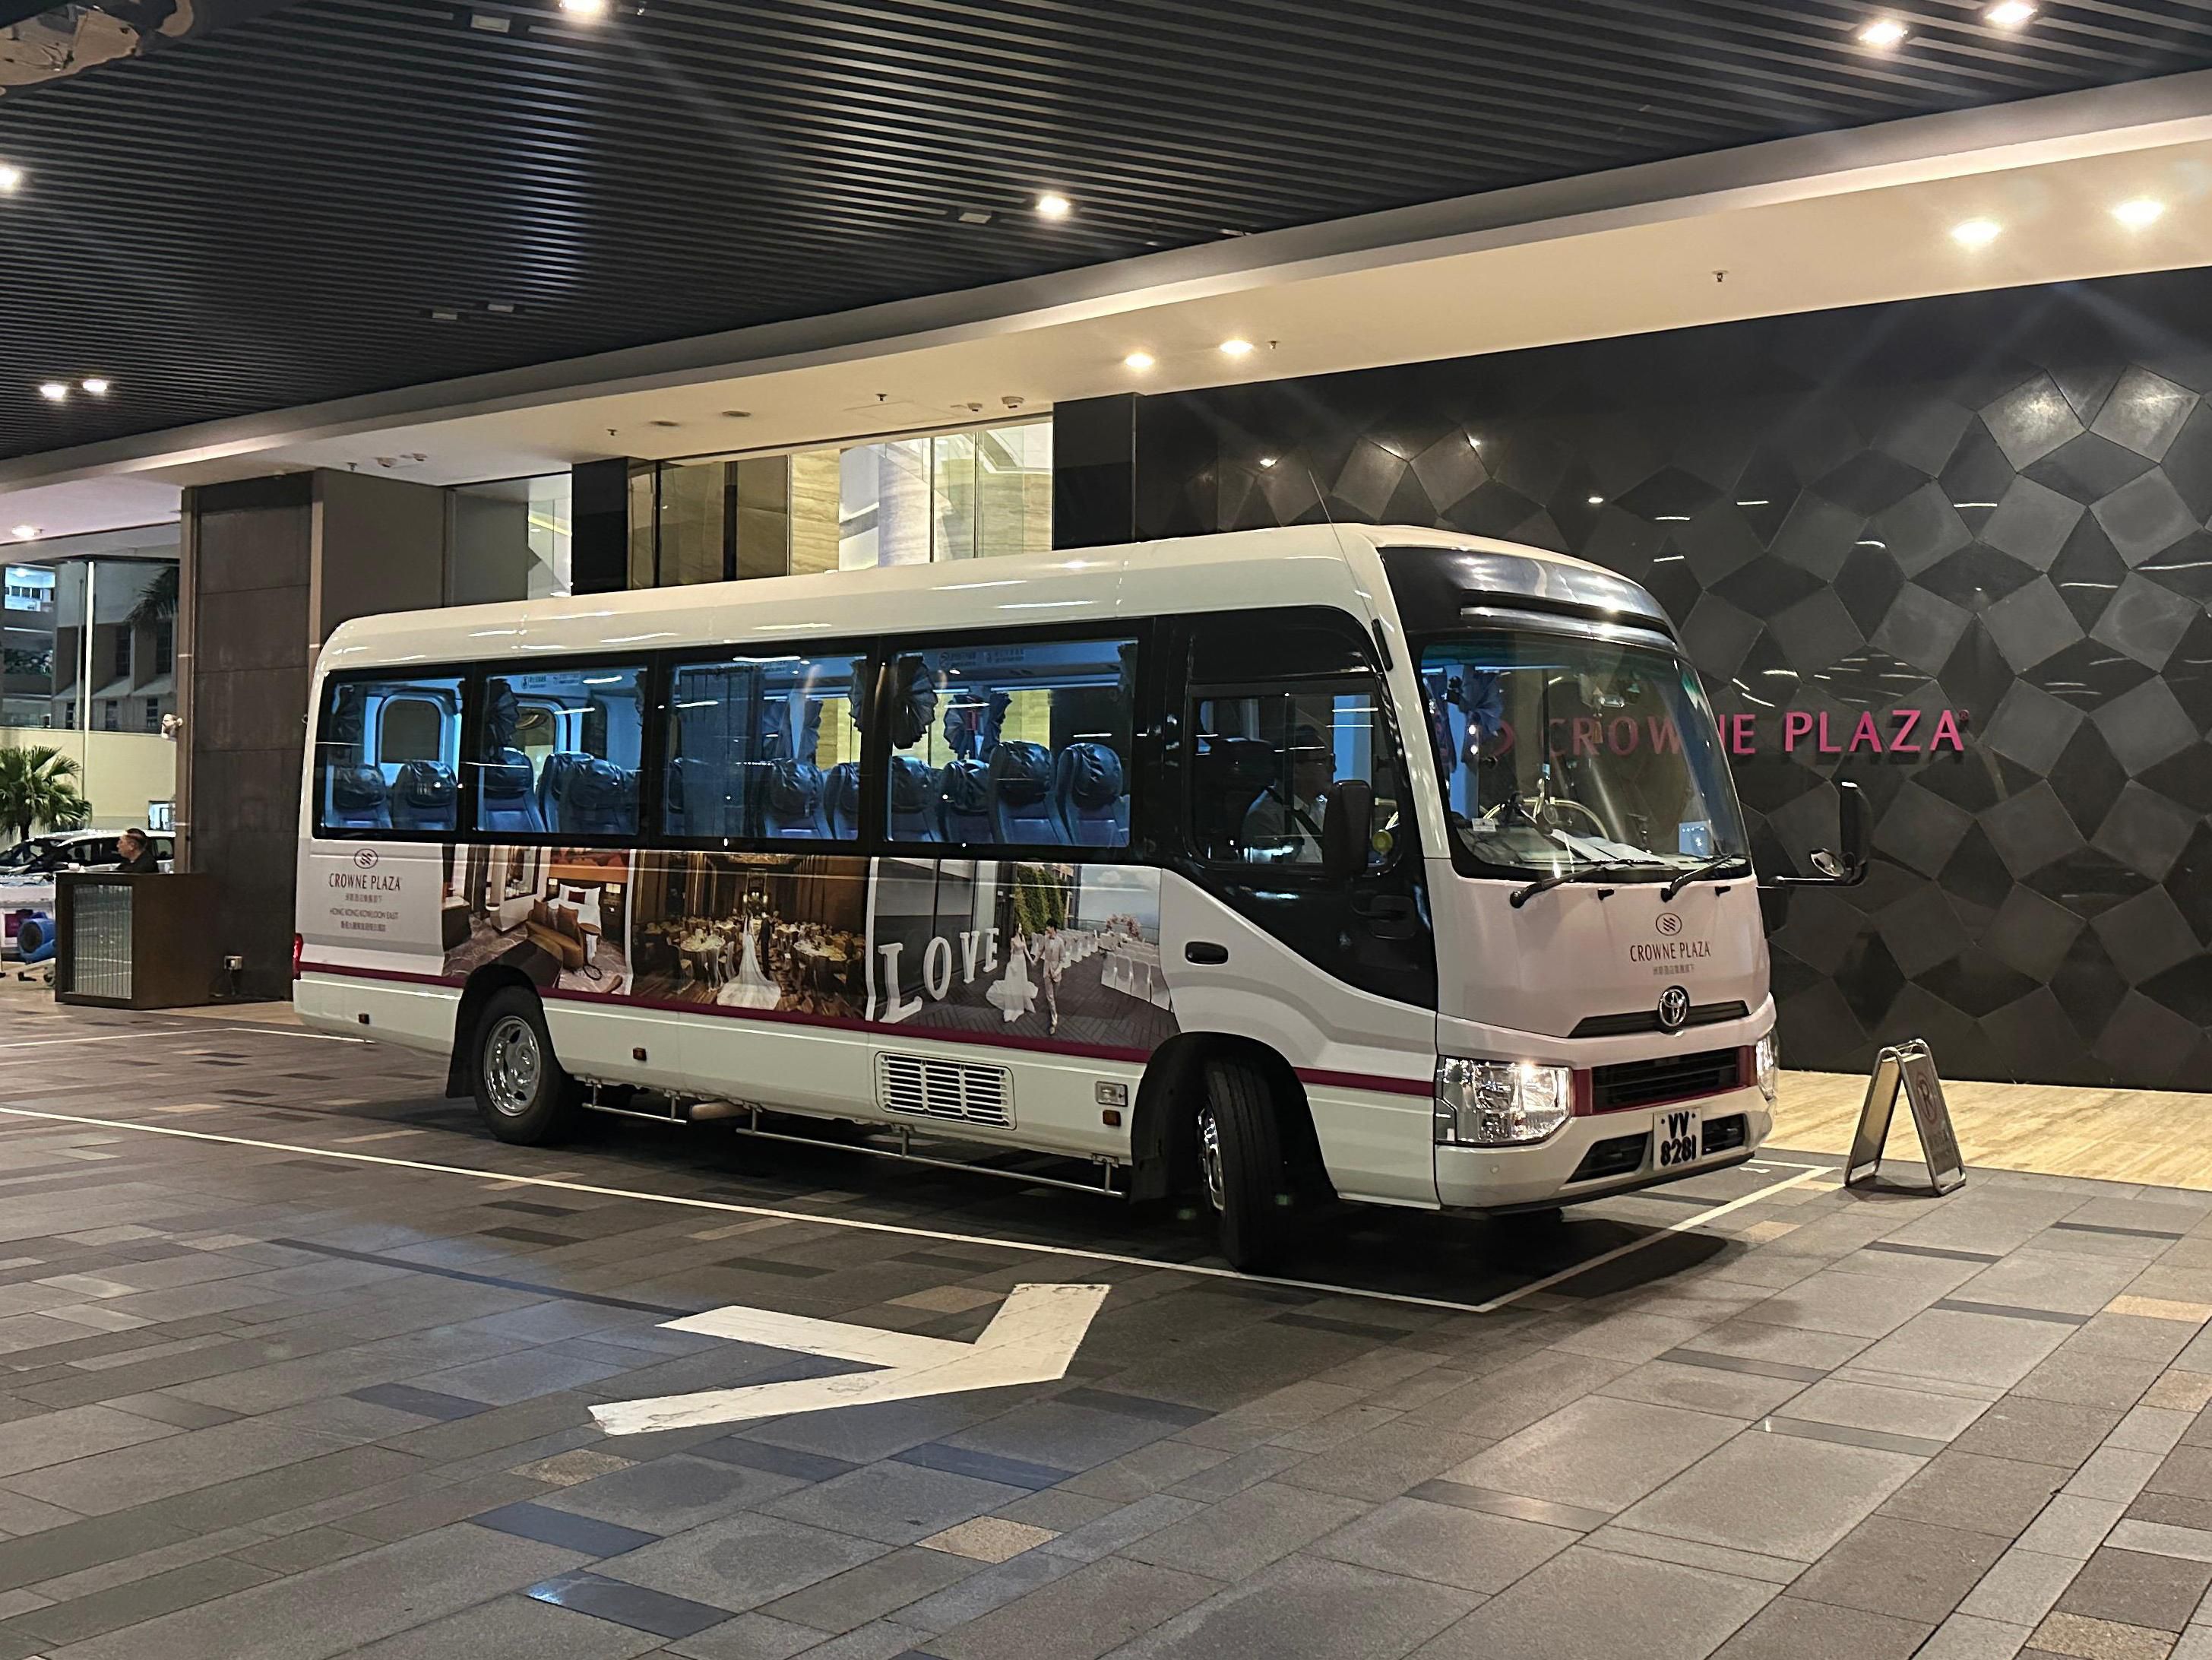 The wait is over! Introducing our brand new shuttle bus service connecting the hotel, Kowloon train stations, and TST shopping area! Enjoy a convenient and hassle-free ride to your favorite shopping destinations. Enjoy a convenient and hassle-free ride to your favorite shopping destinations.